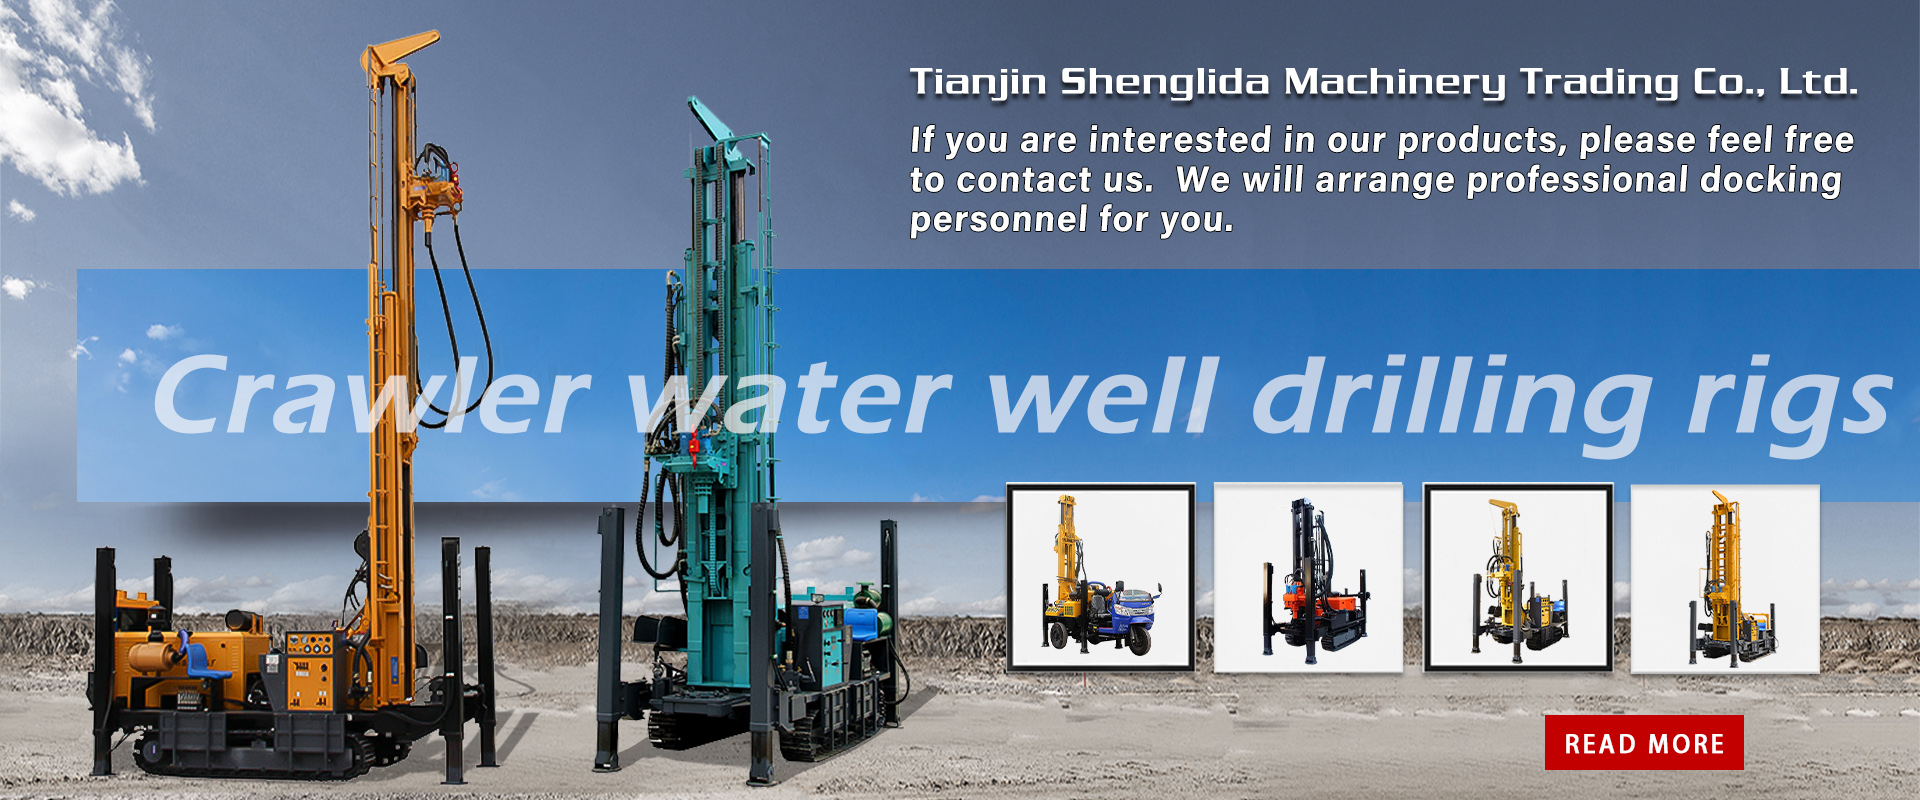 shenglida water well drilling rig